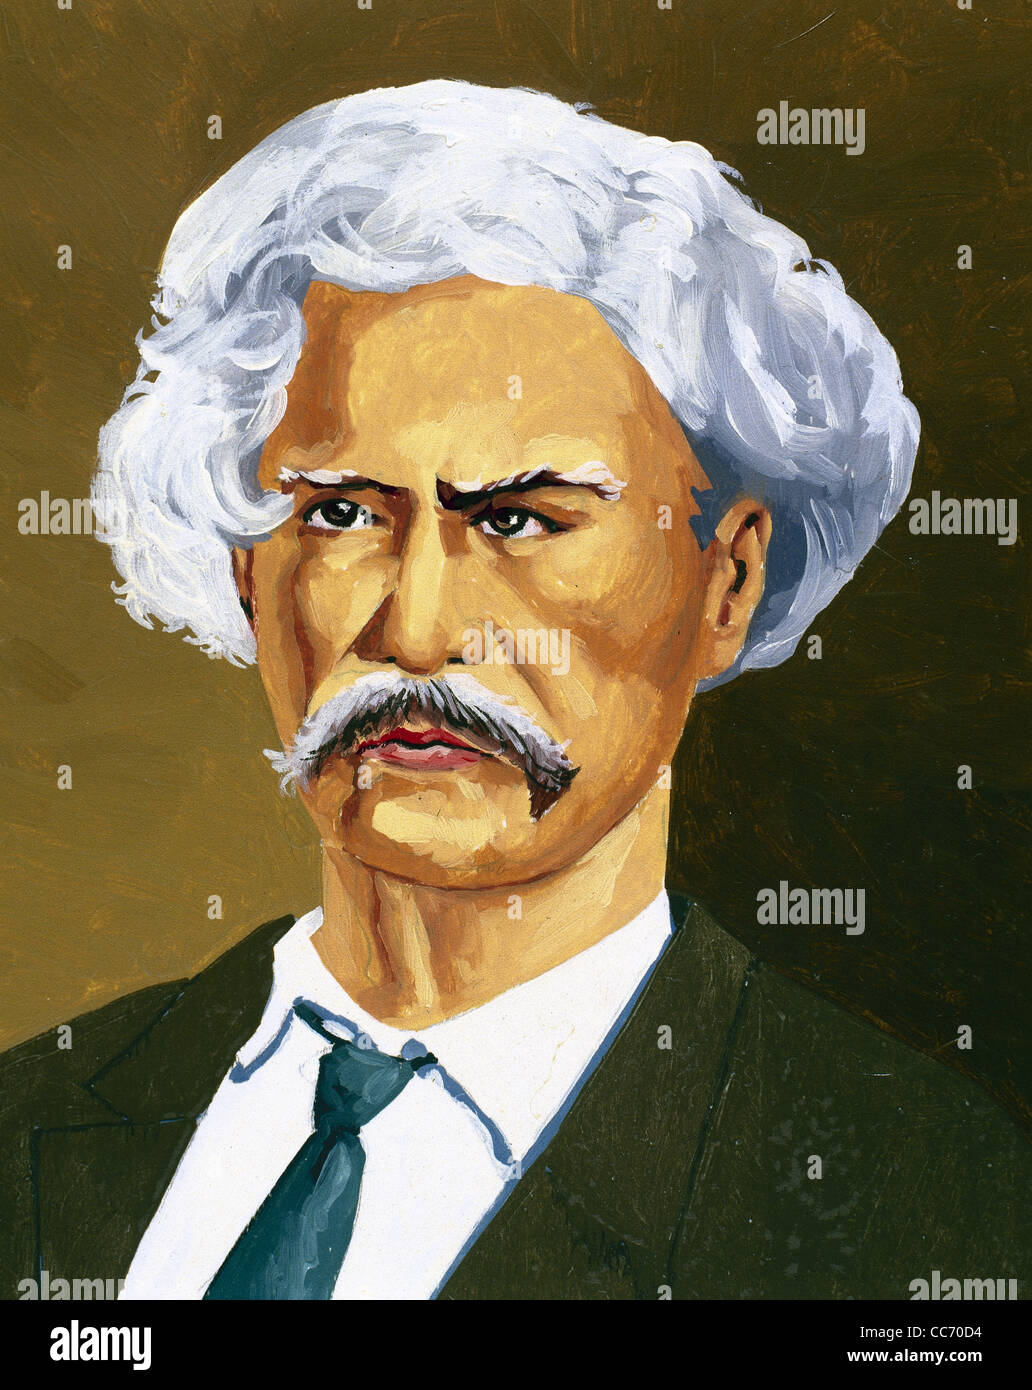 Mark Twain (1835-1910). American author and humorist. Portrait. Color drawing. Stock Photo